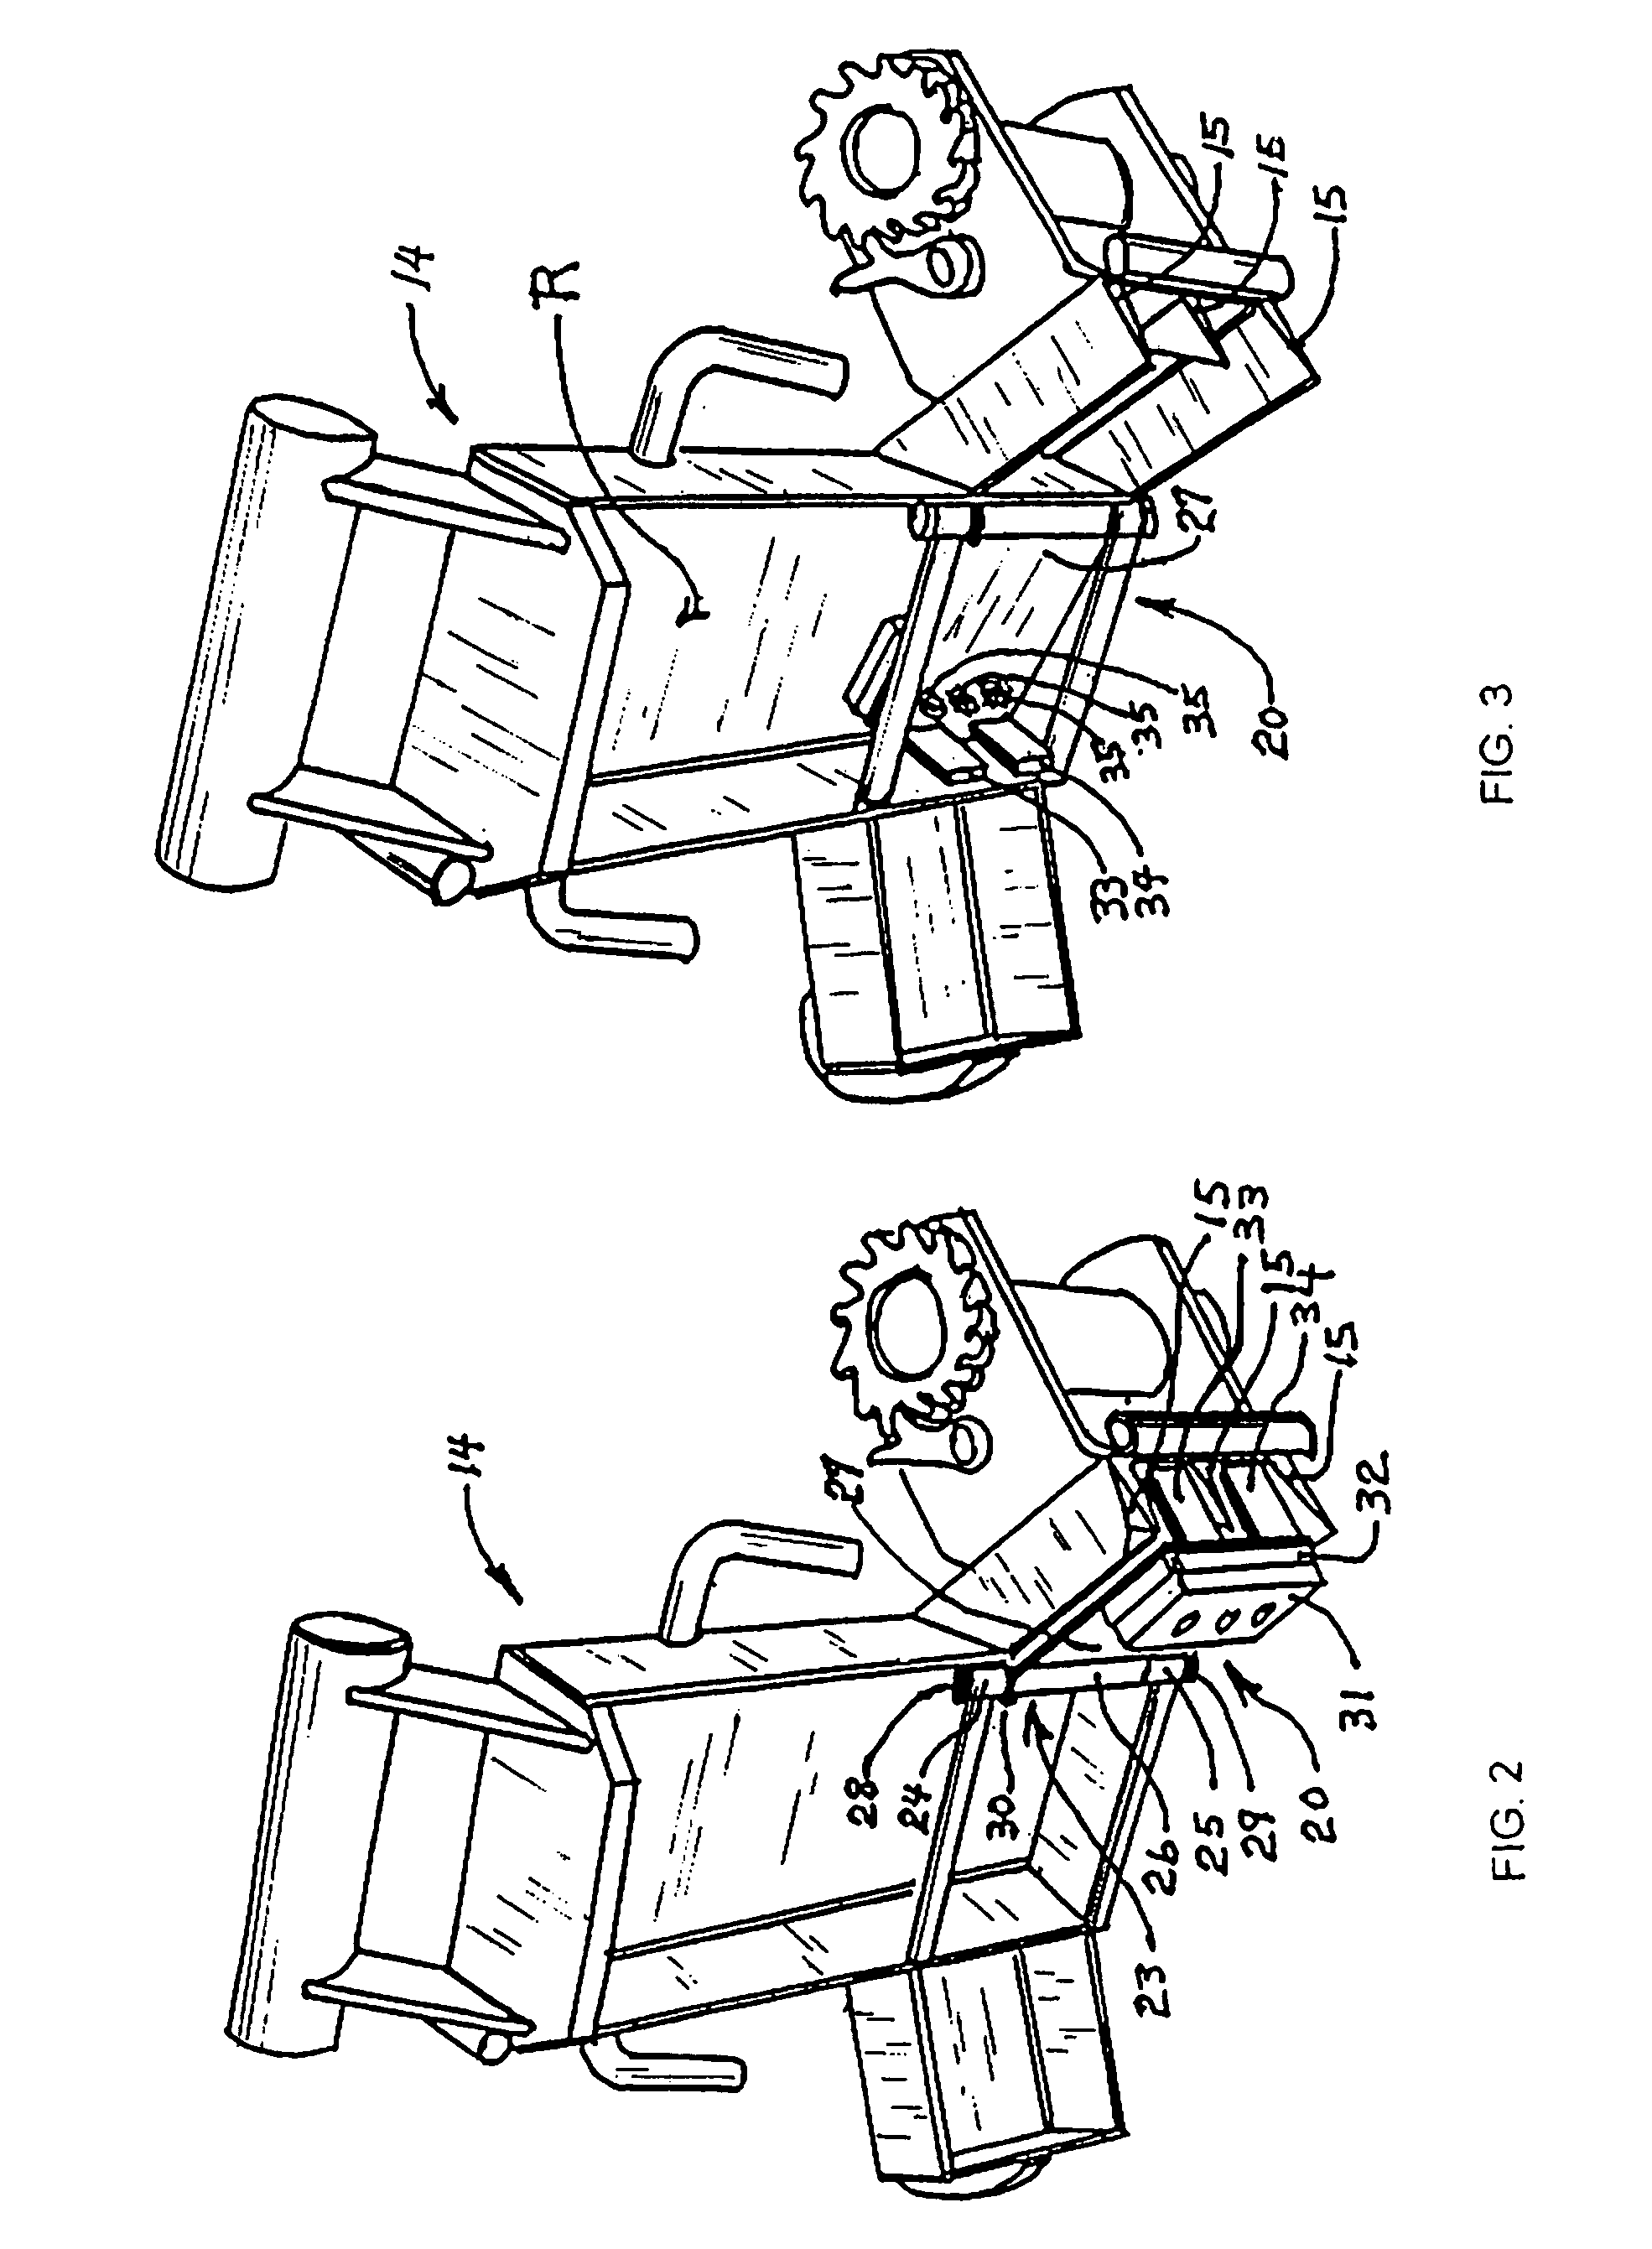 Flip-out function converter for tree-mounted frame apparatus used in arbor rigging procedures